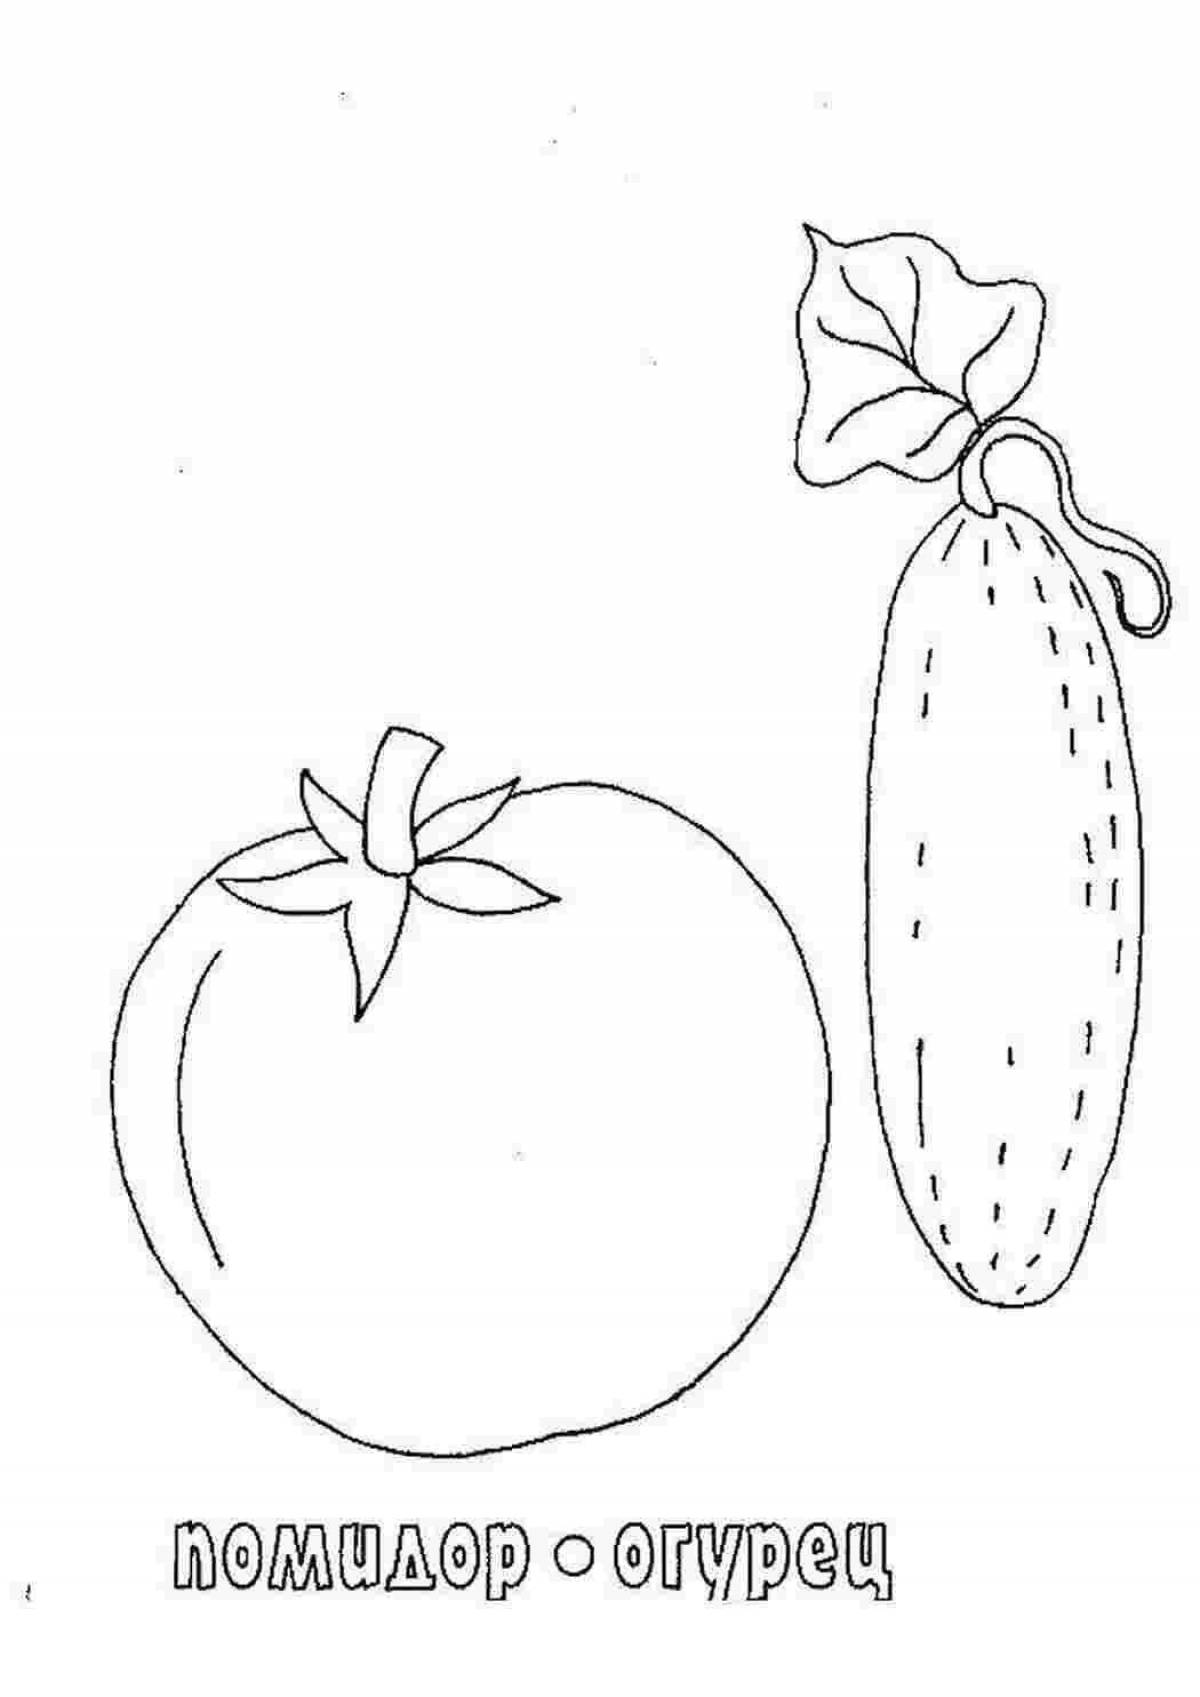 Unique cucumber and tomato coloring page for kids